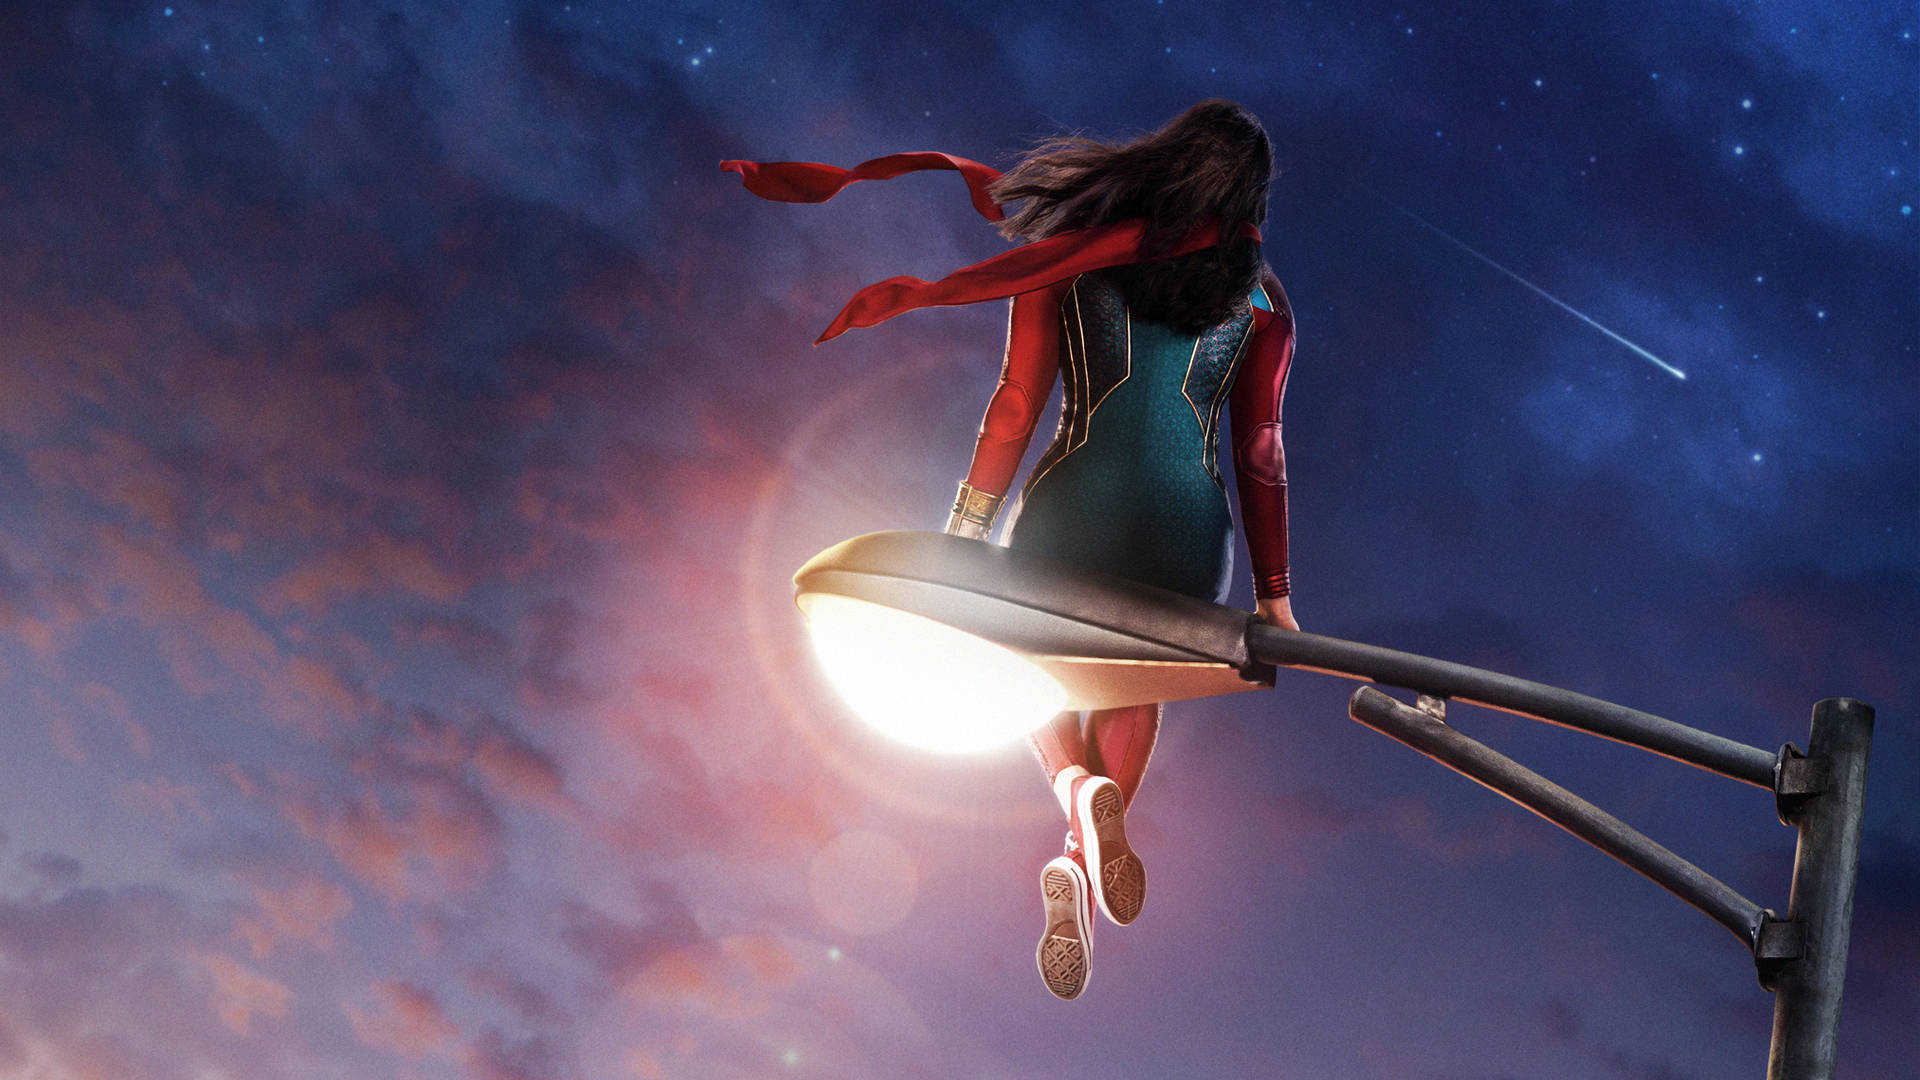 Ms Marvel And A Shooting Star Wallpaper